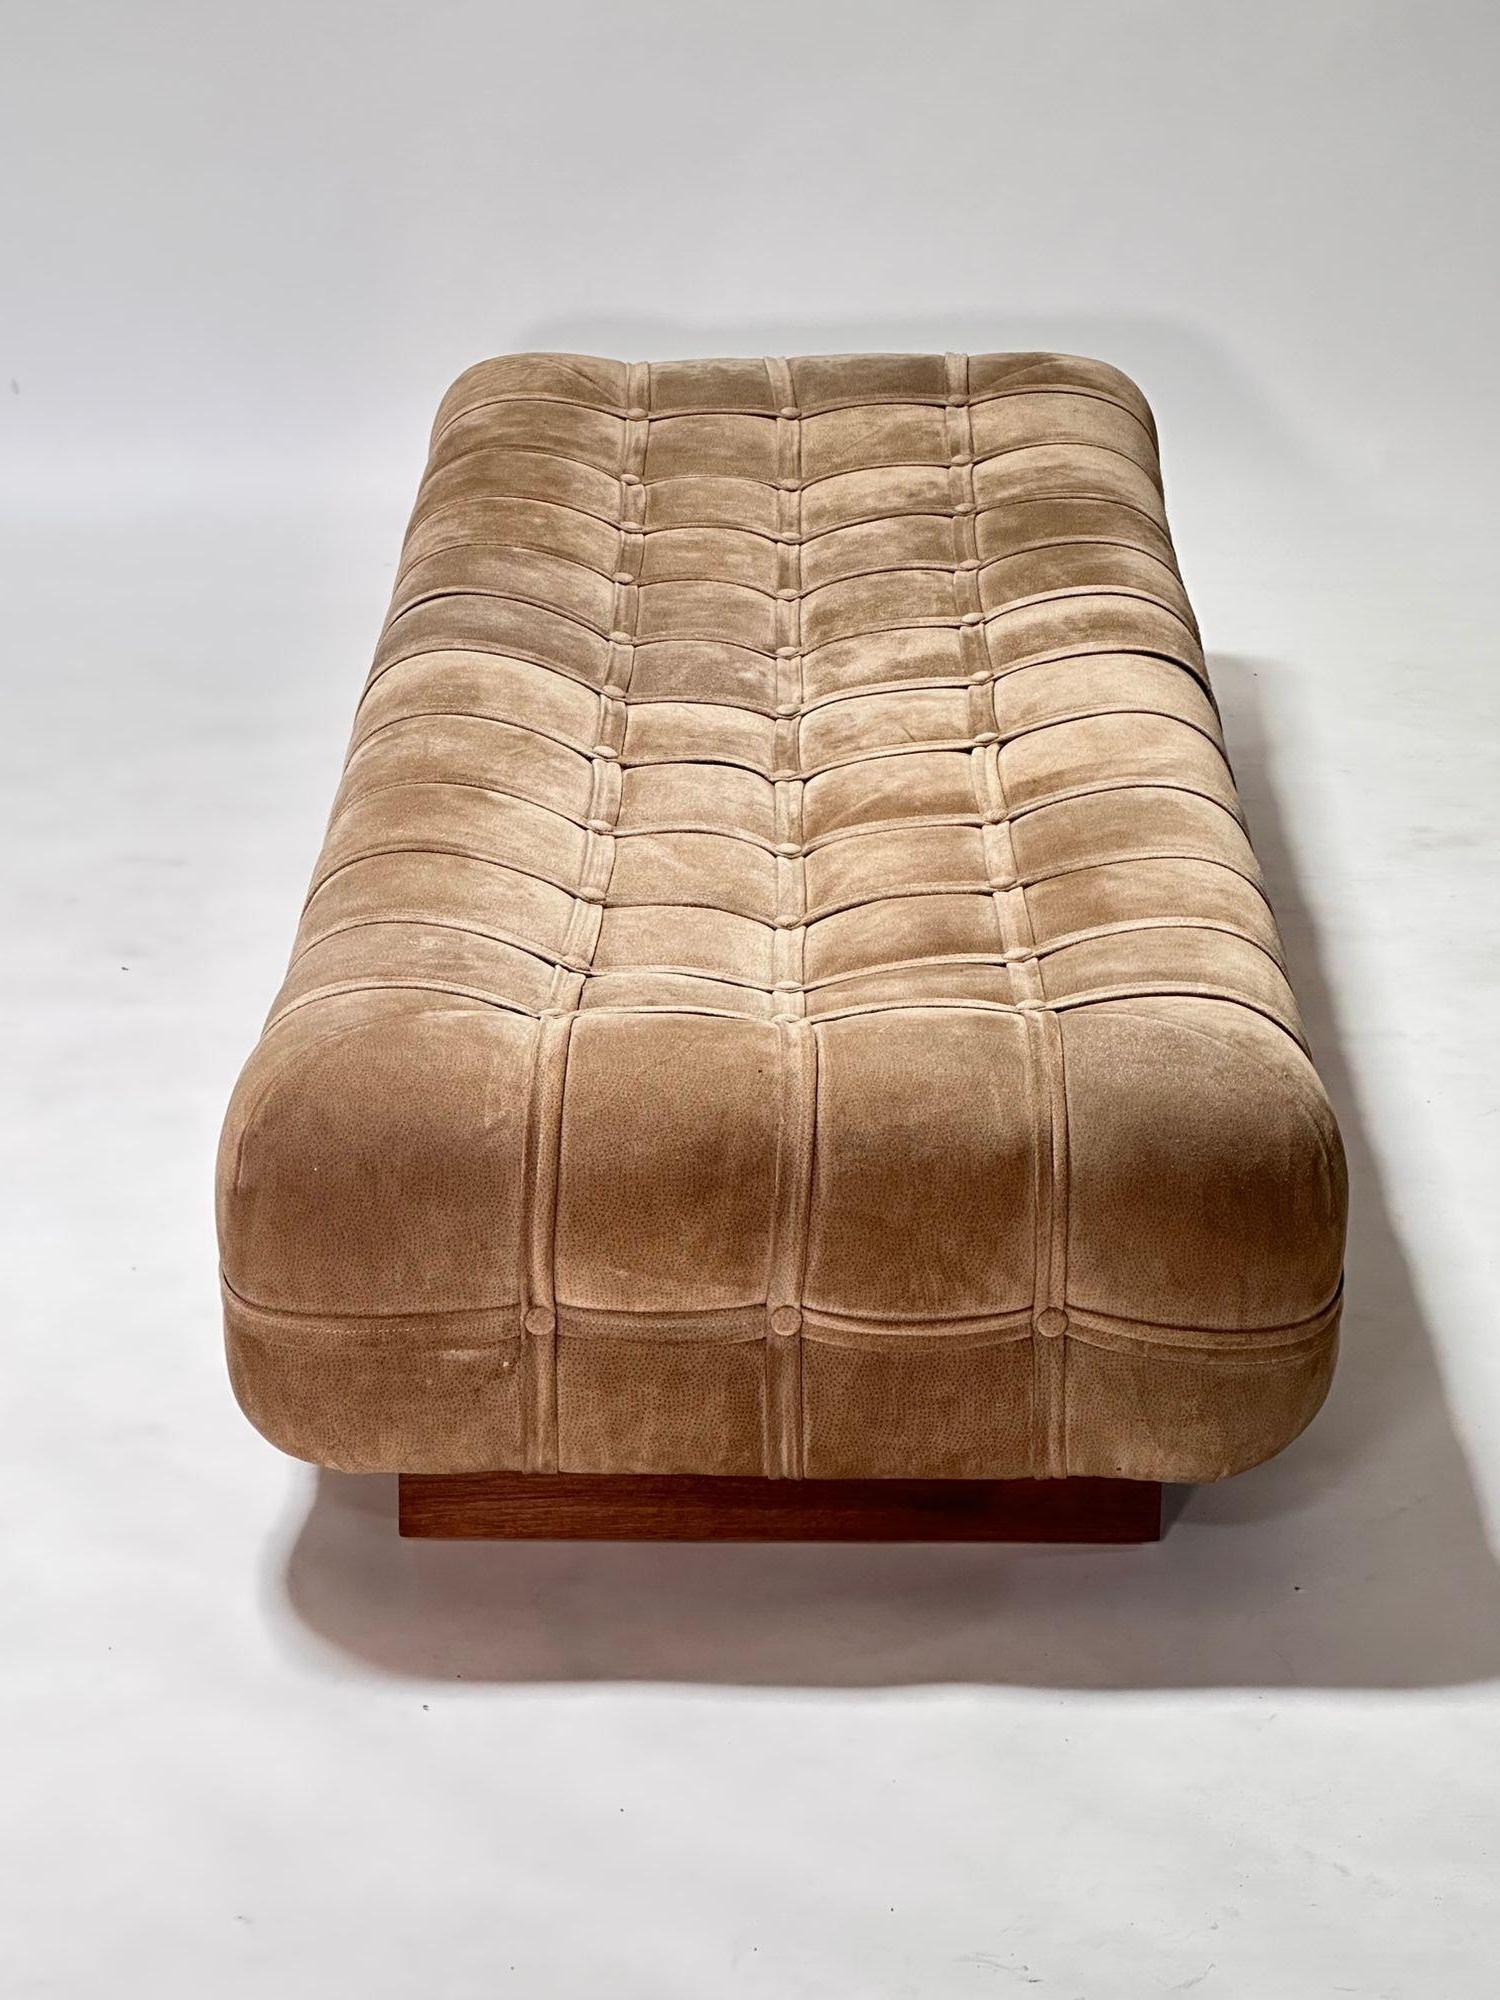 Post-Modern Suede Marshmallow Pouf Bench/ Daybed on Walnut Plinth Base, 1970 For Sale